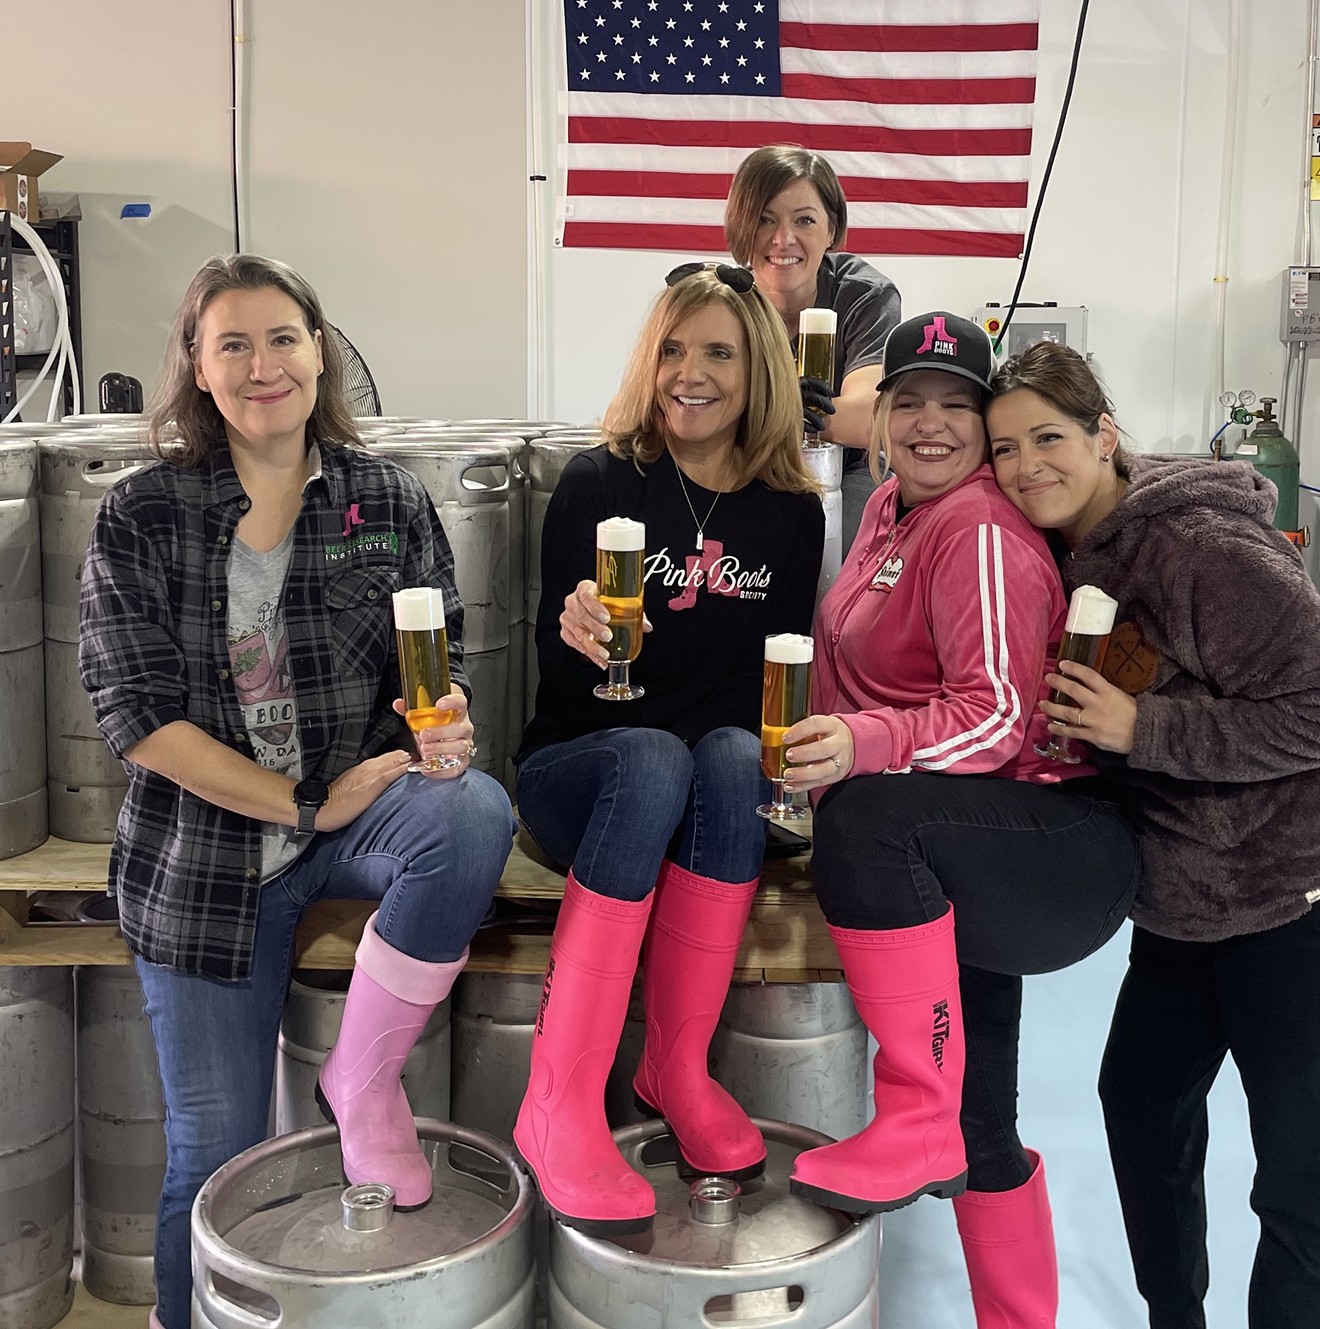 The Pink Boots Society Collaboration Brew Day at Hundred Mile Brewing Co. in Tempe drew members including Victoria Pietrasik, brewery owner Sue Rigler, head brewer Valerie Adee, Billie McGovern, and Liz Rosevear.